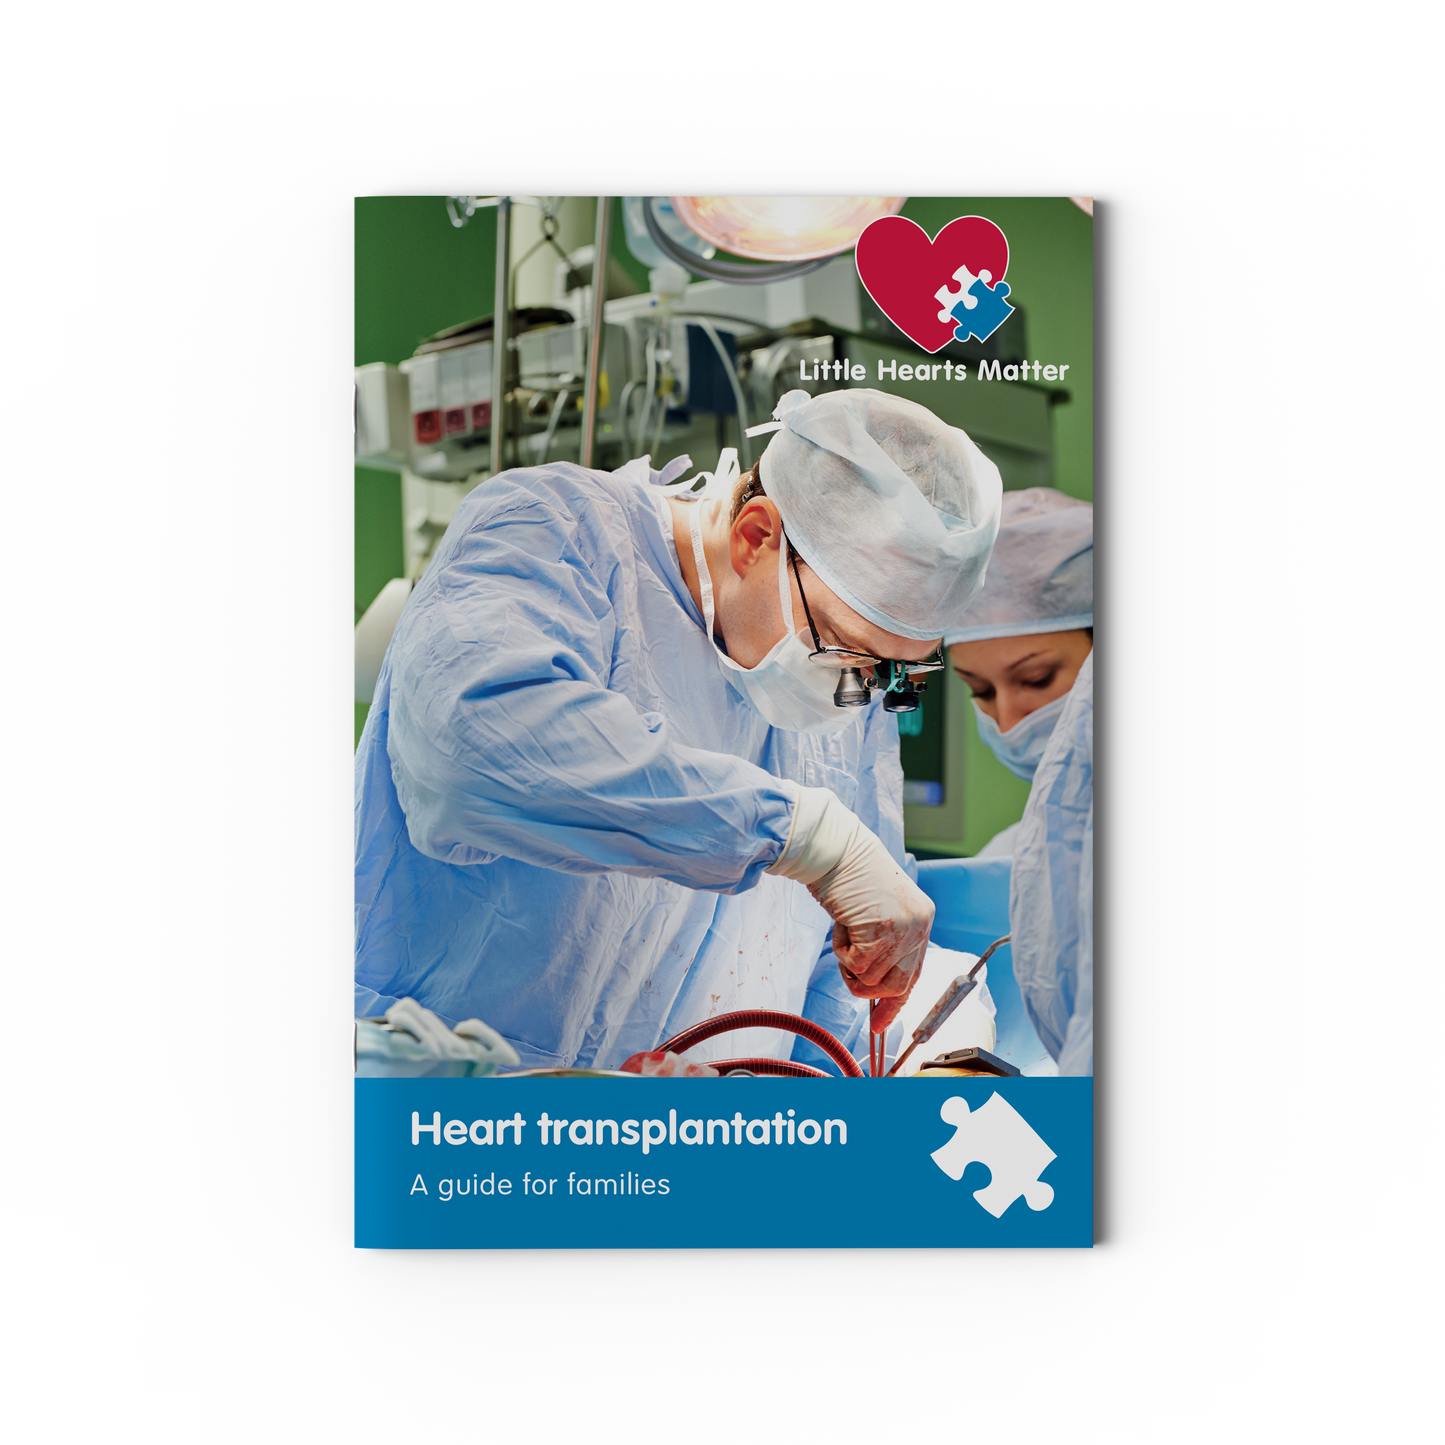 Heart transplantation - a guide for families